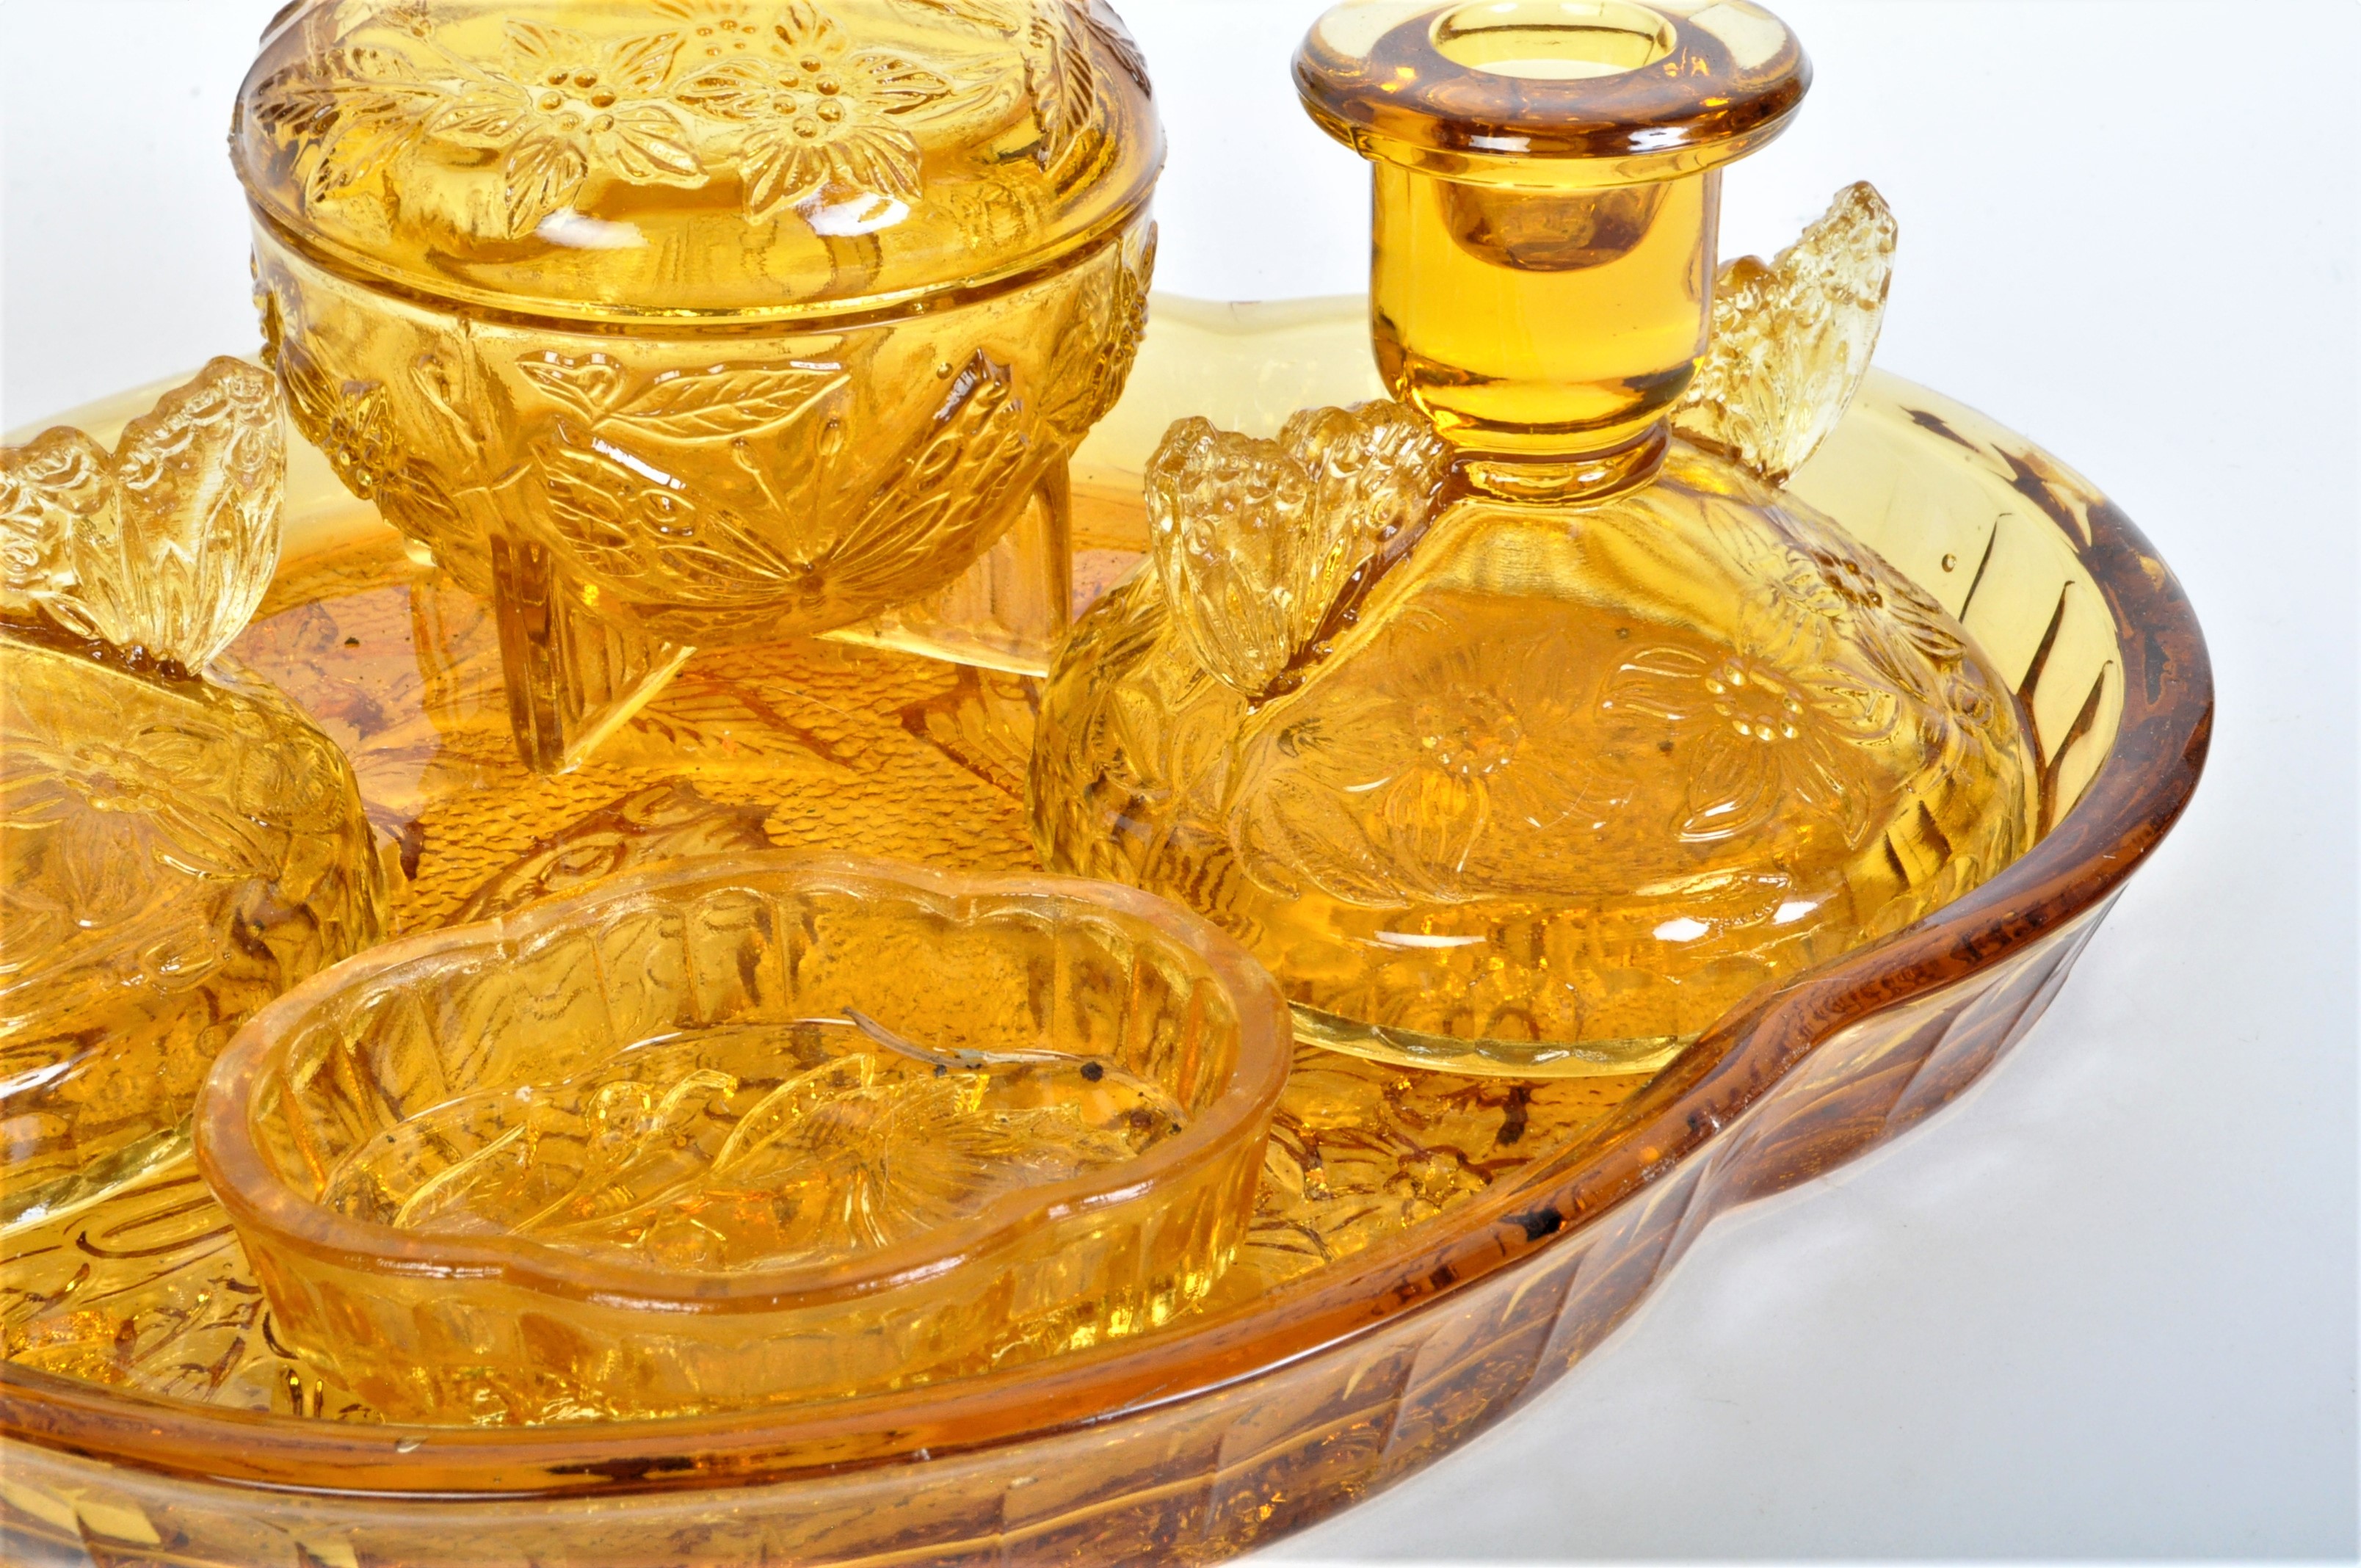 ART DECO AMBER GLASS SOWERBY BUTTERFLY VANITY SET - Image 4 of 6